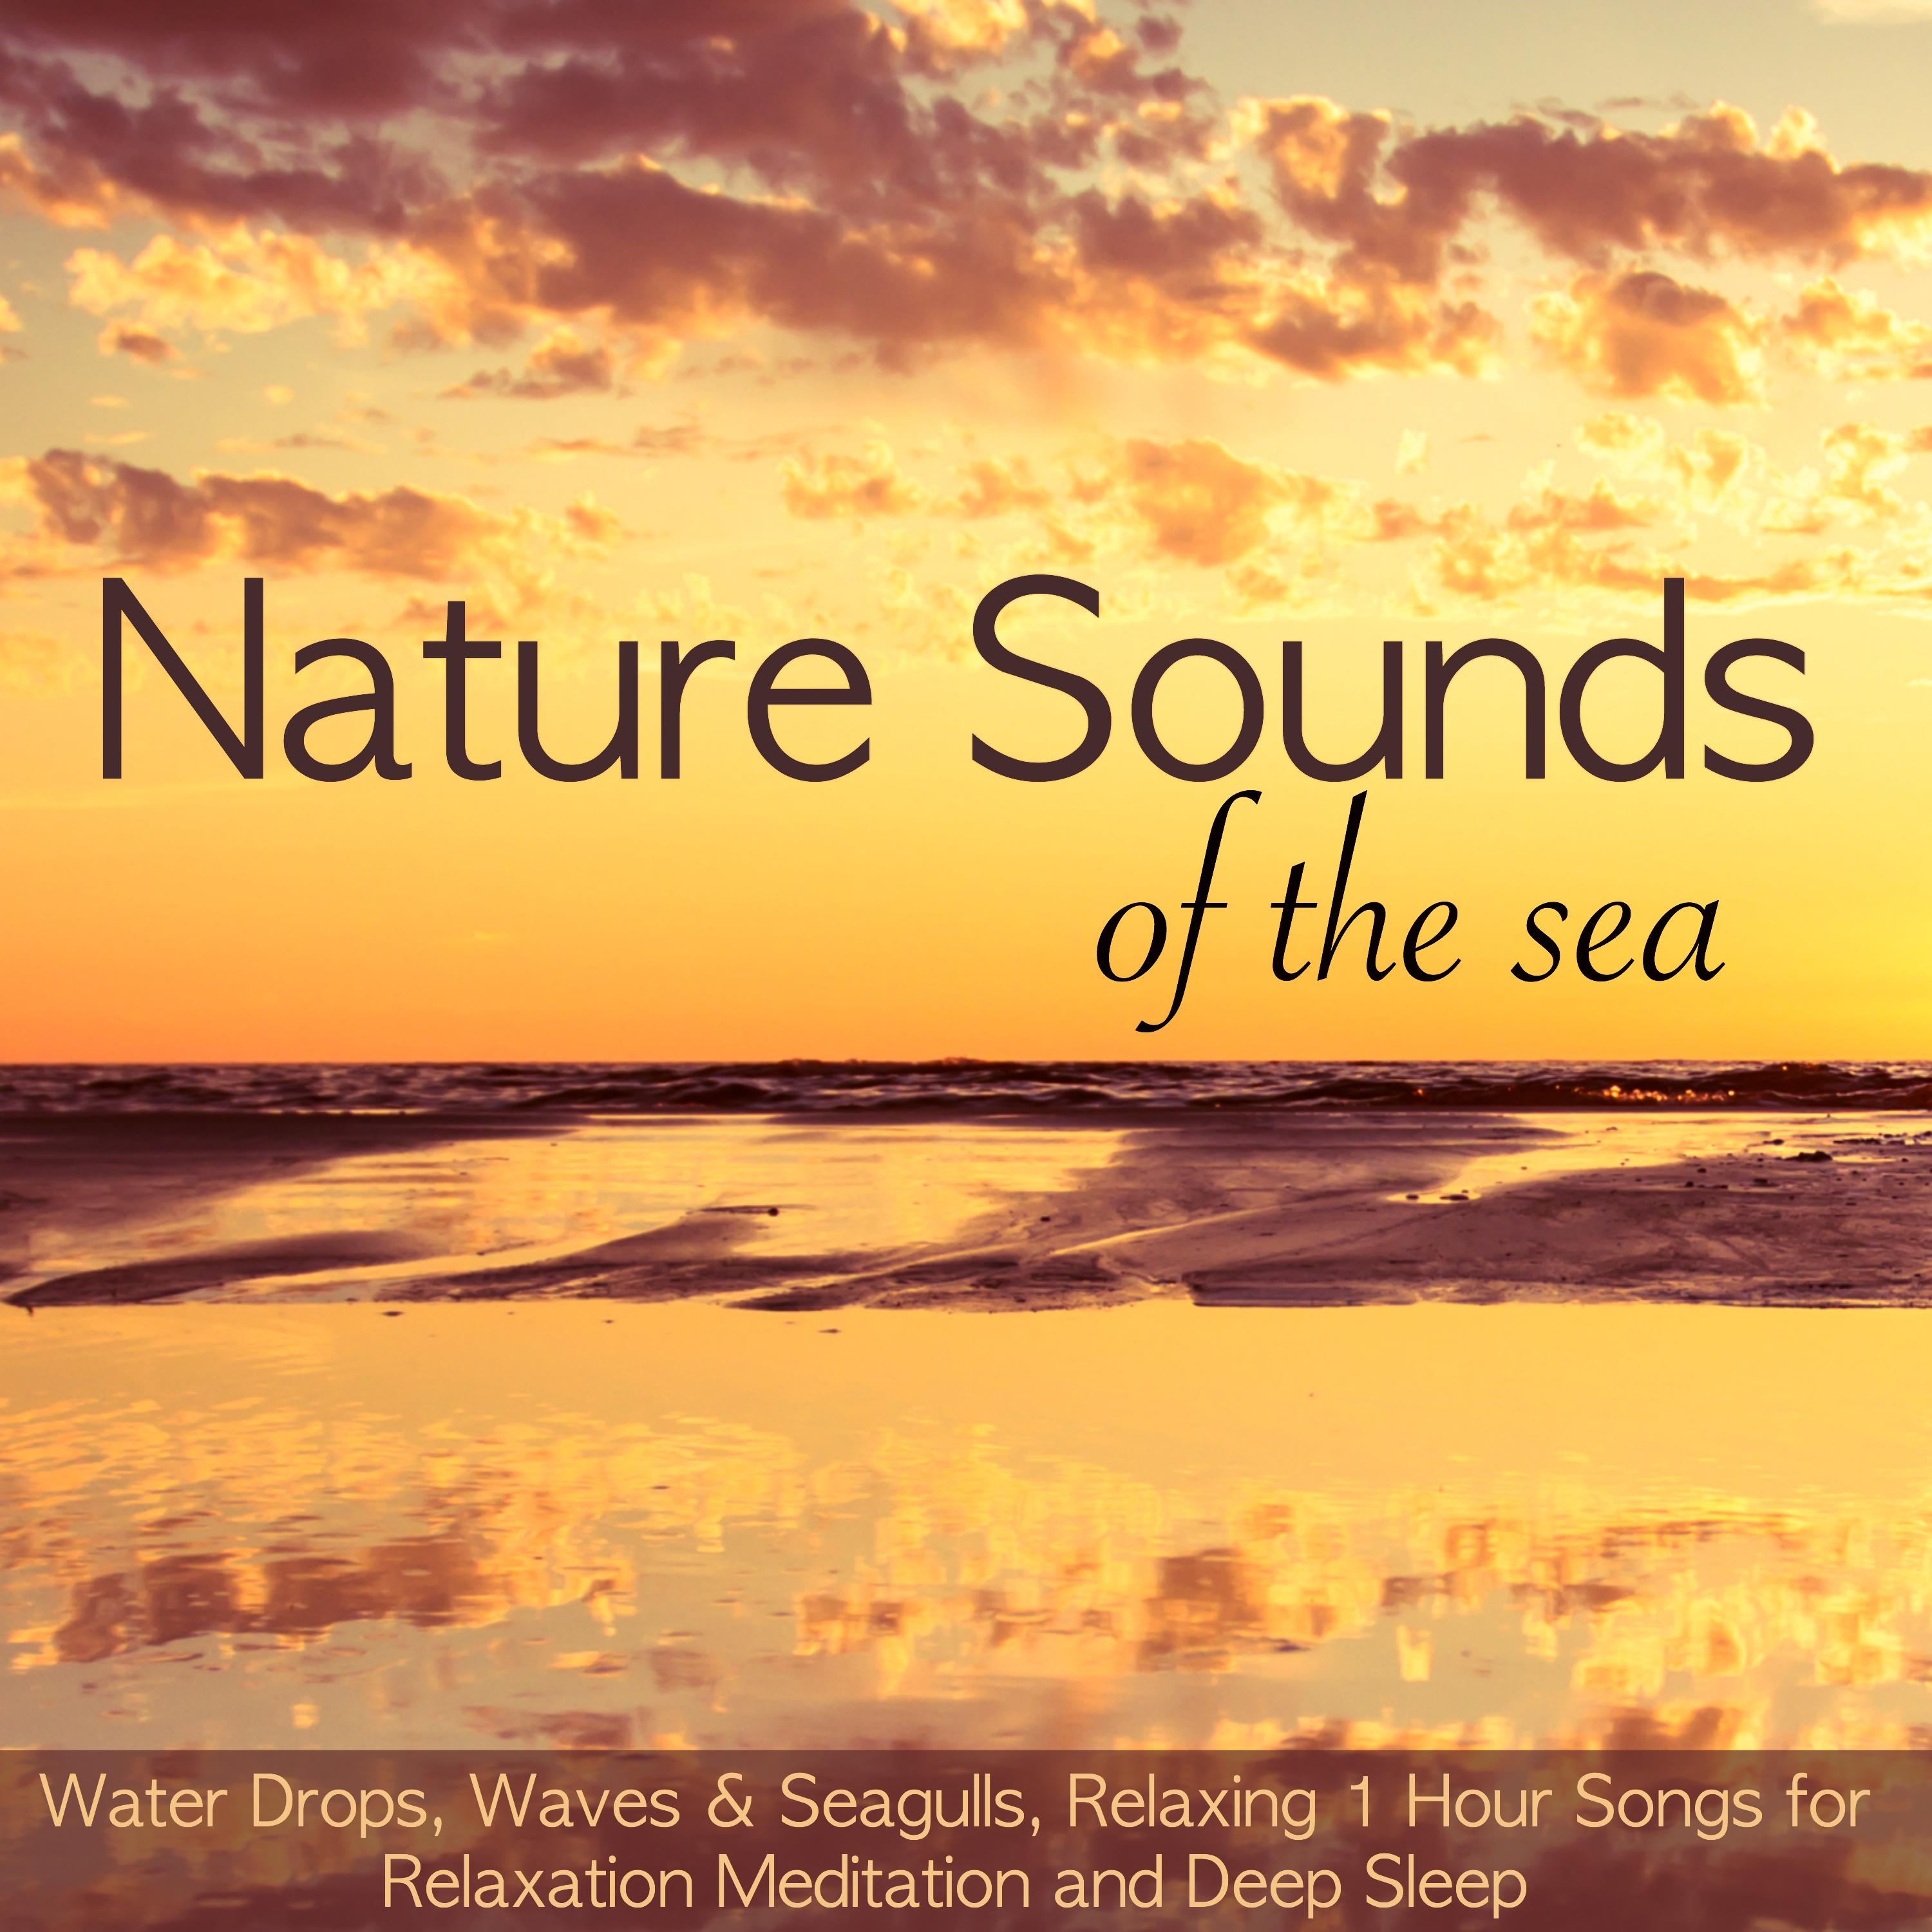 The Sound of the Sea, Waves and Seagulls - Relaxing Sounds of Nature for Deep Relaxation and Calm Mind